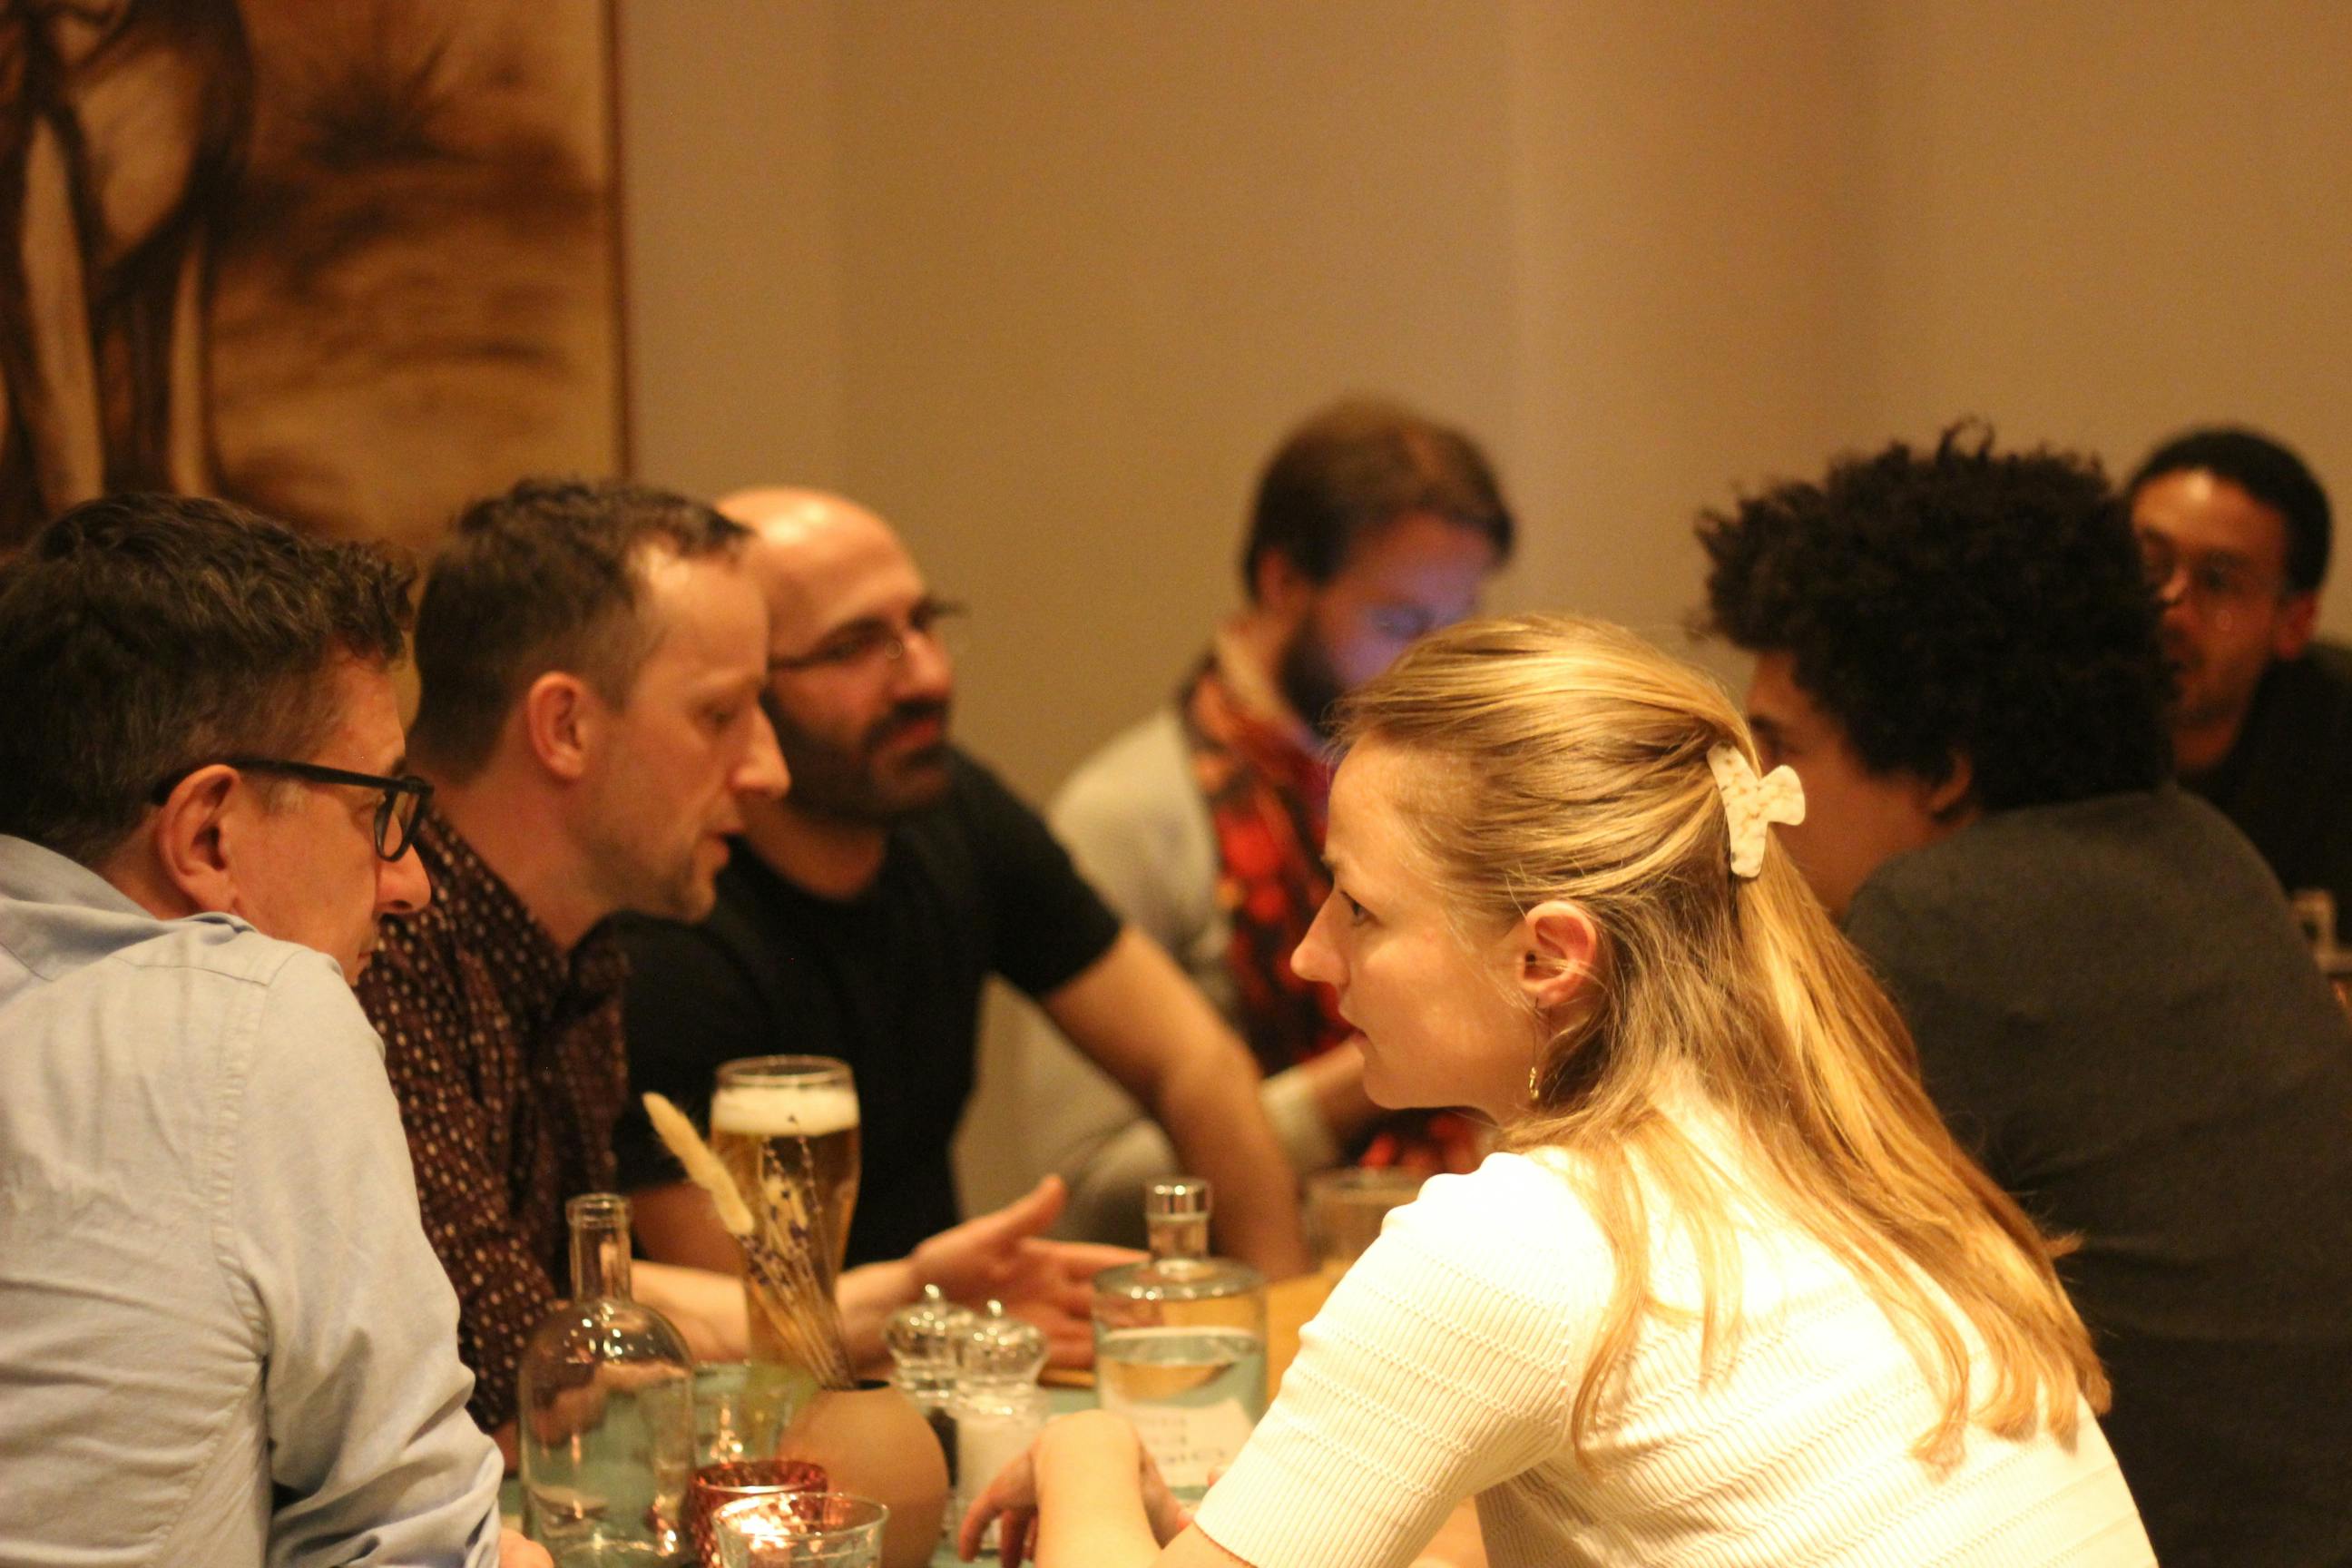 Food, beer & ideas going around at the Climate Tech Dinner in Berlin